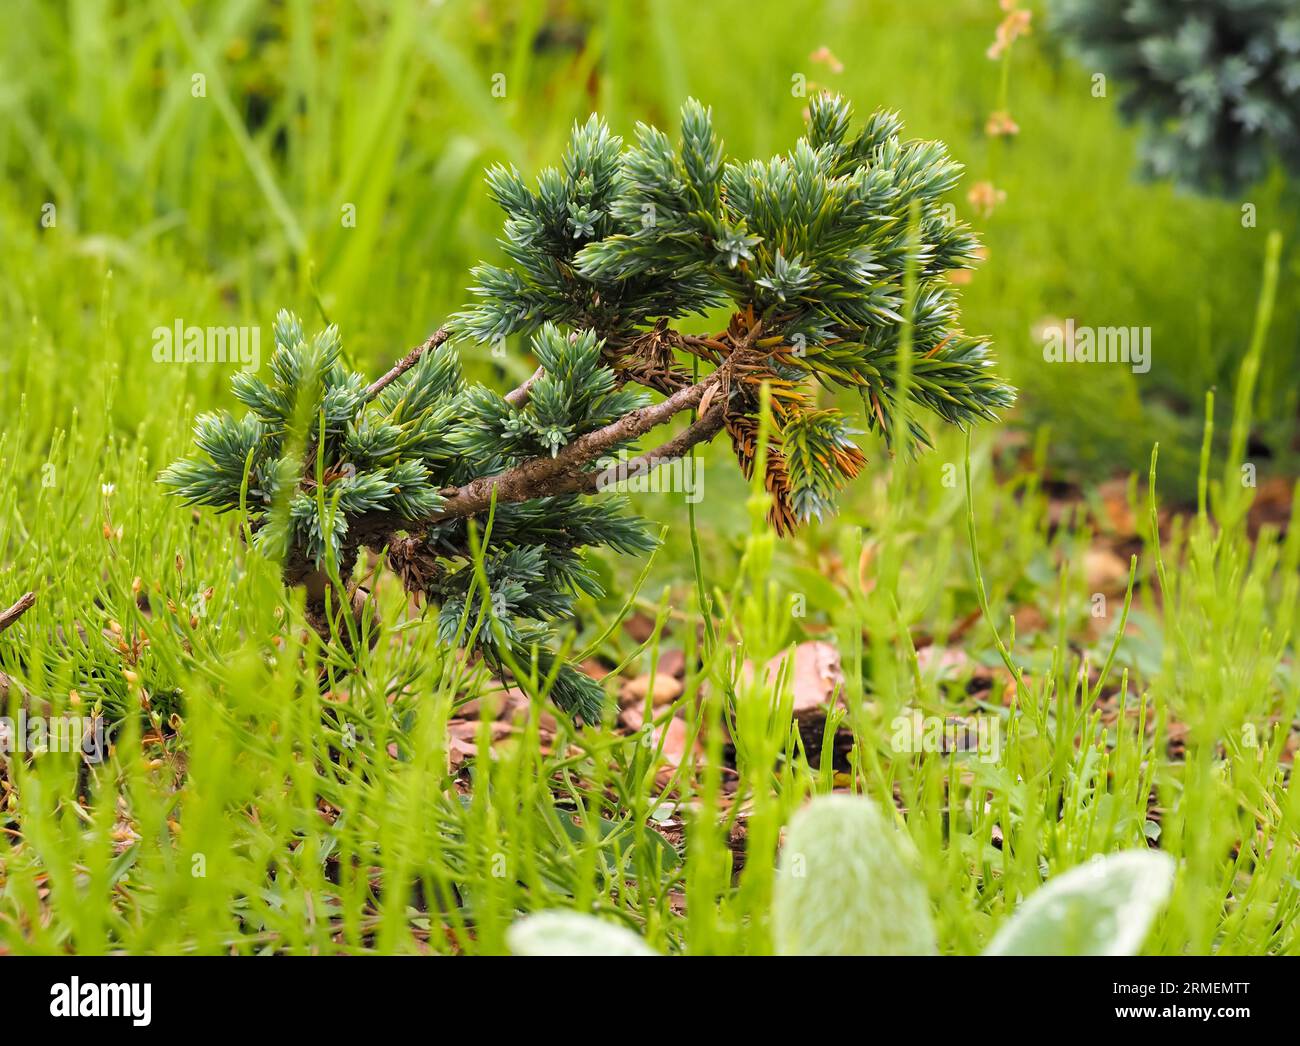 Pinus mugo Turra, mountain pine, blackhorse, dwarf mountain pine variety in natural habitat, young twisted shoot, on a blurred background close-up Stock Photo